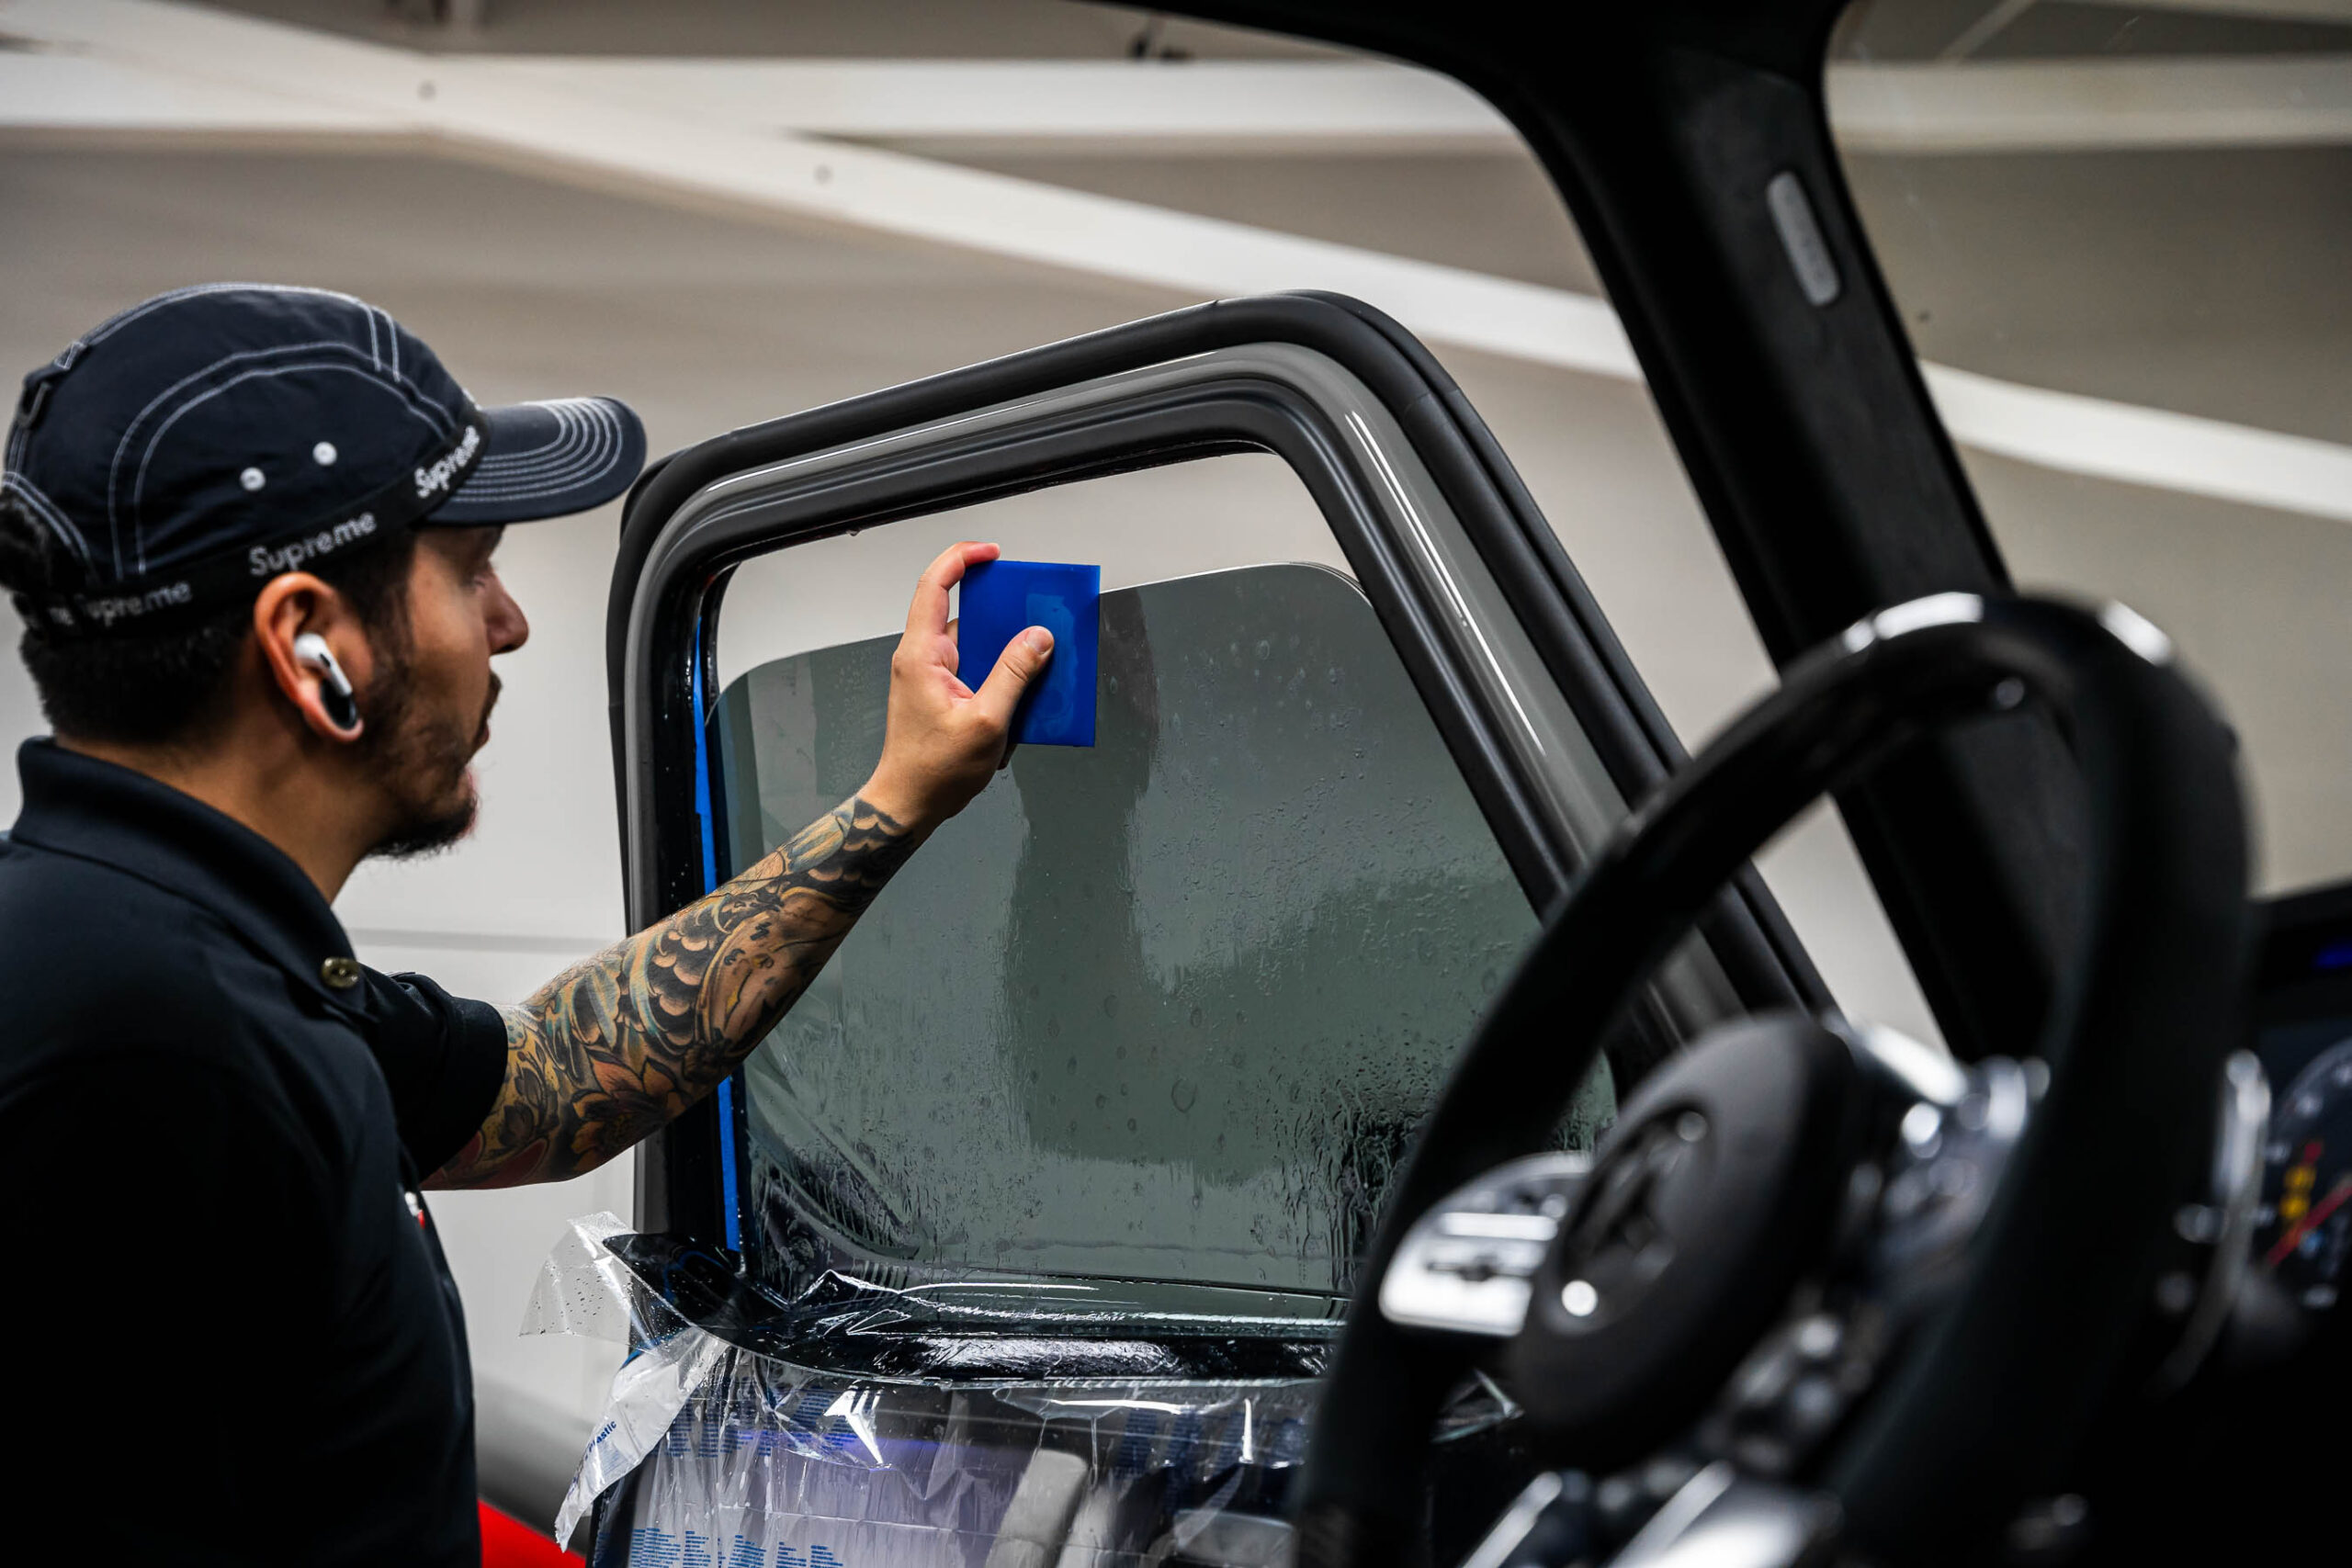 Installing tint on driver's window